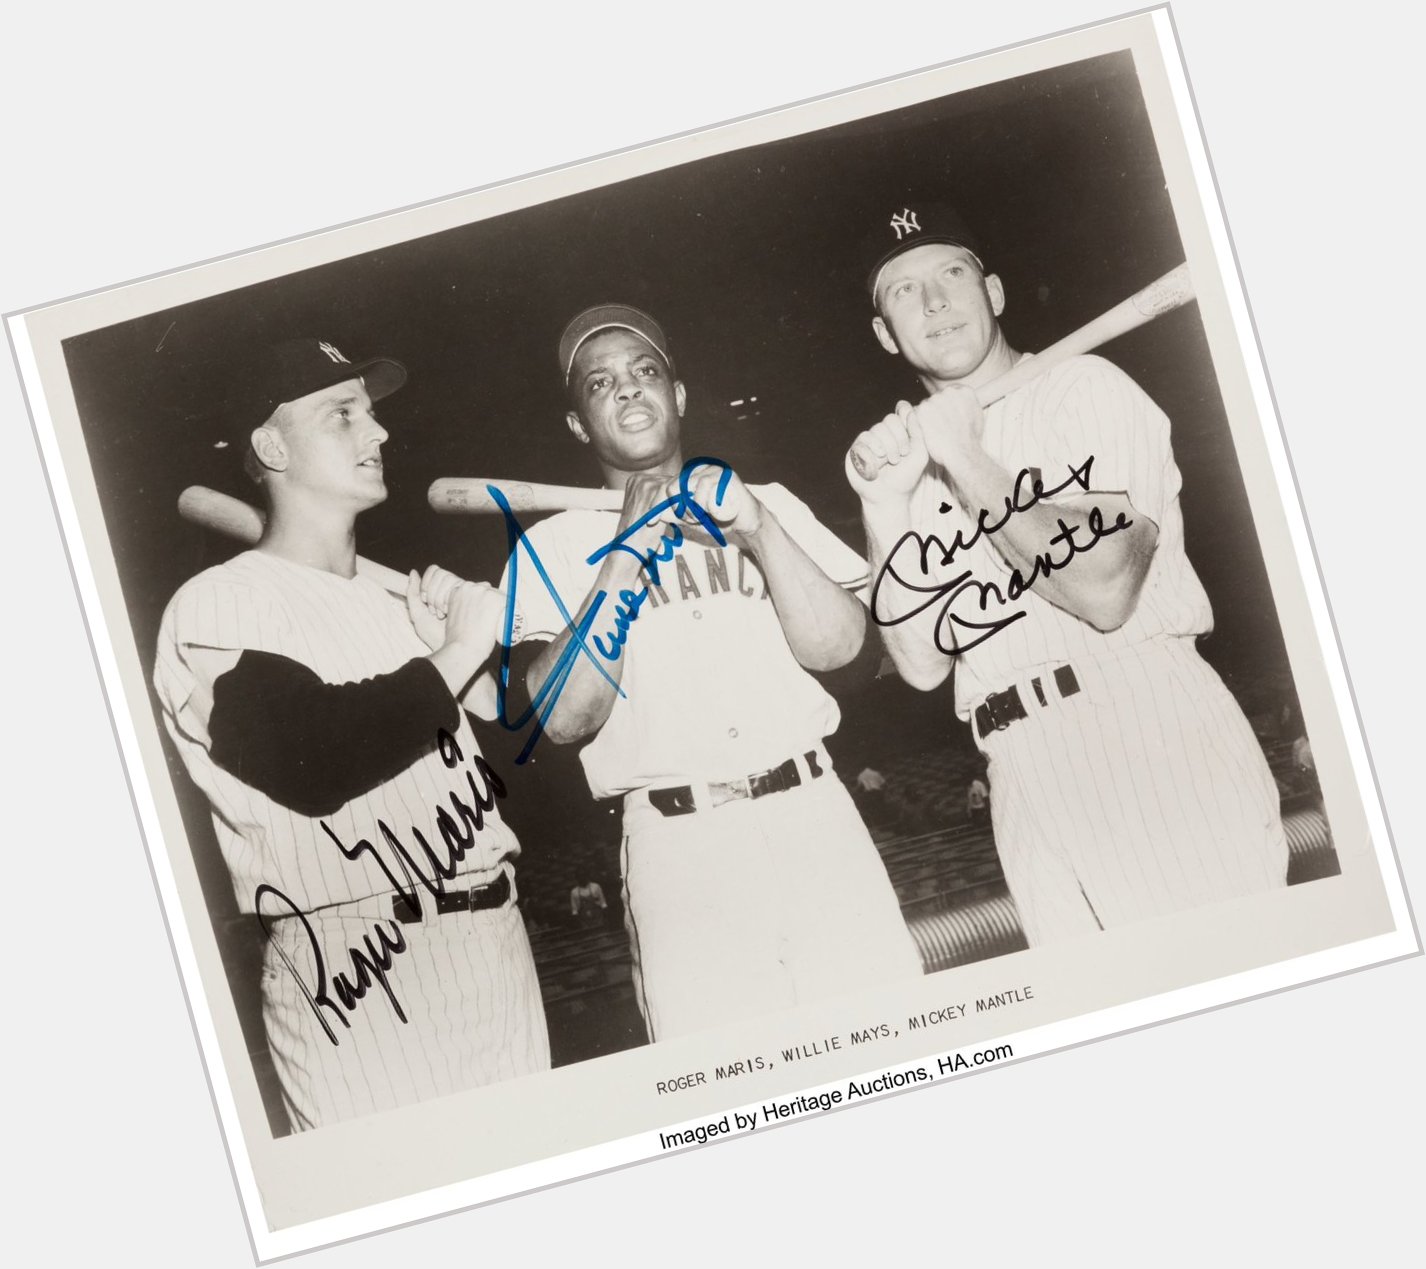 Happy Birthday Willie Mays. Roger, Willie and Mickey.   